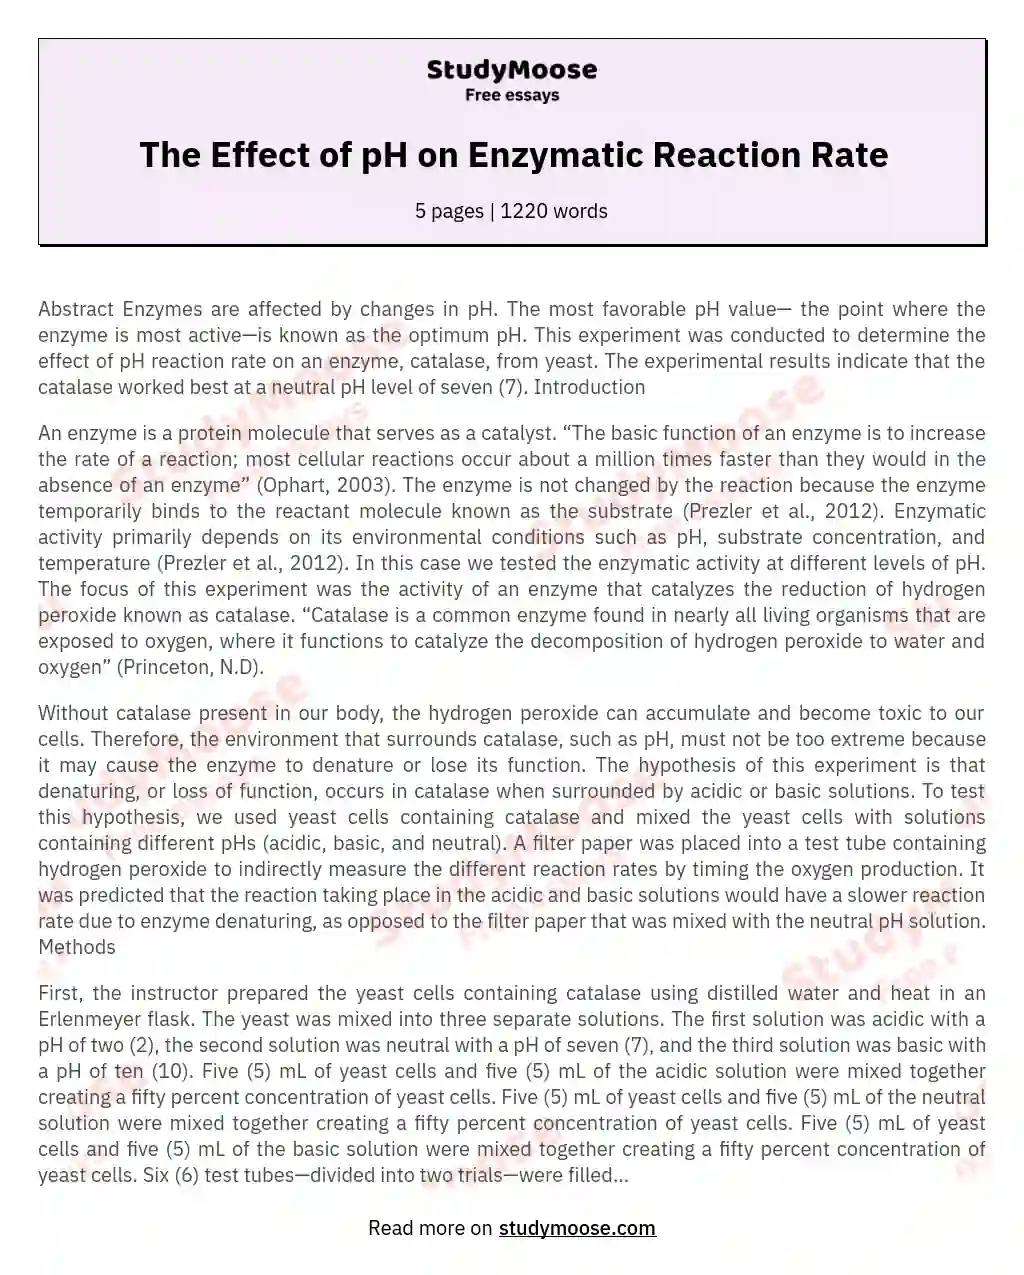 The Effect of pH on Enzymatic Reaction Rate